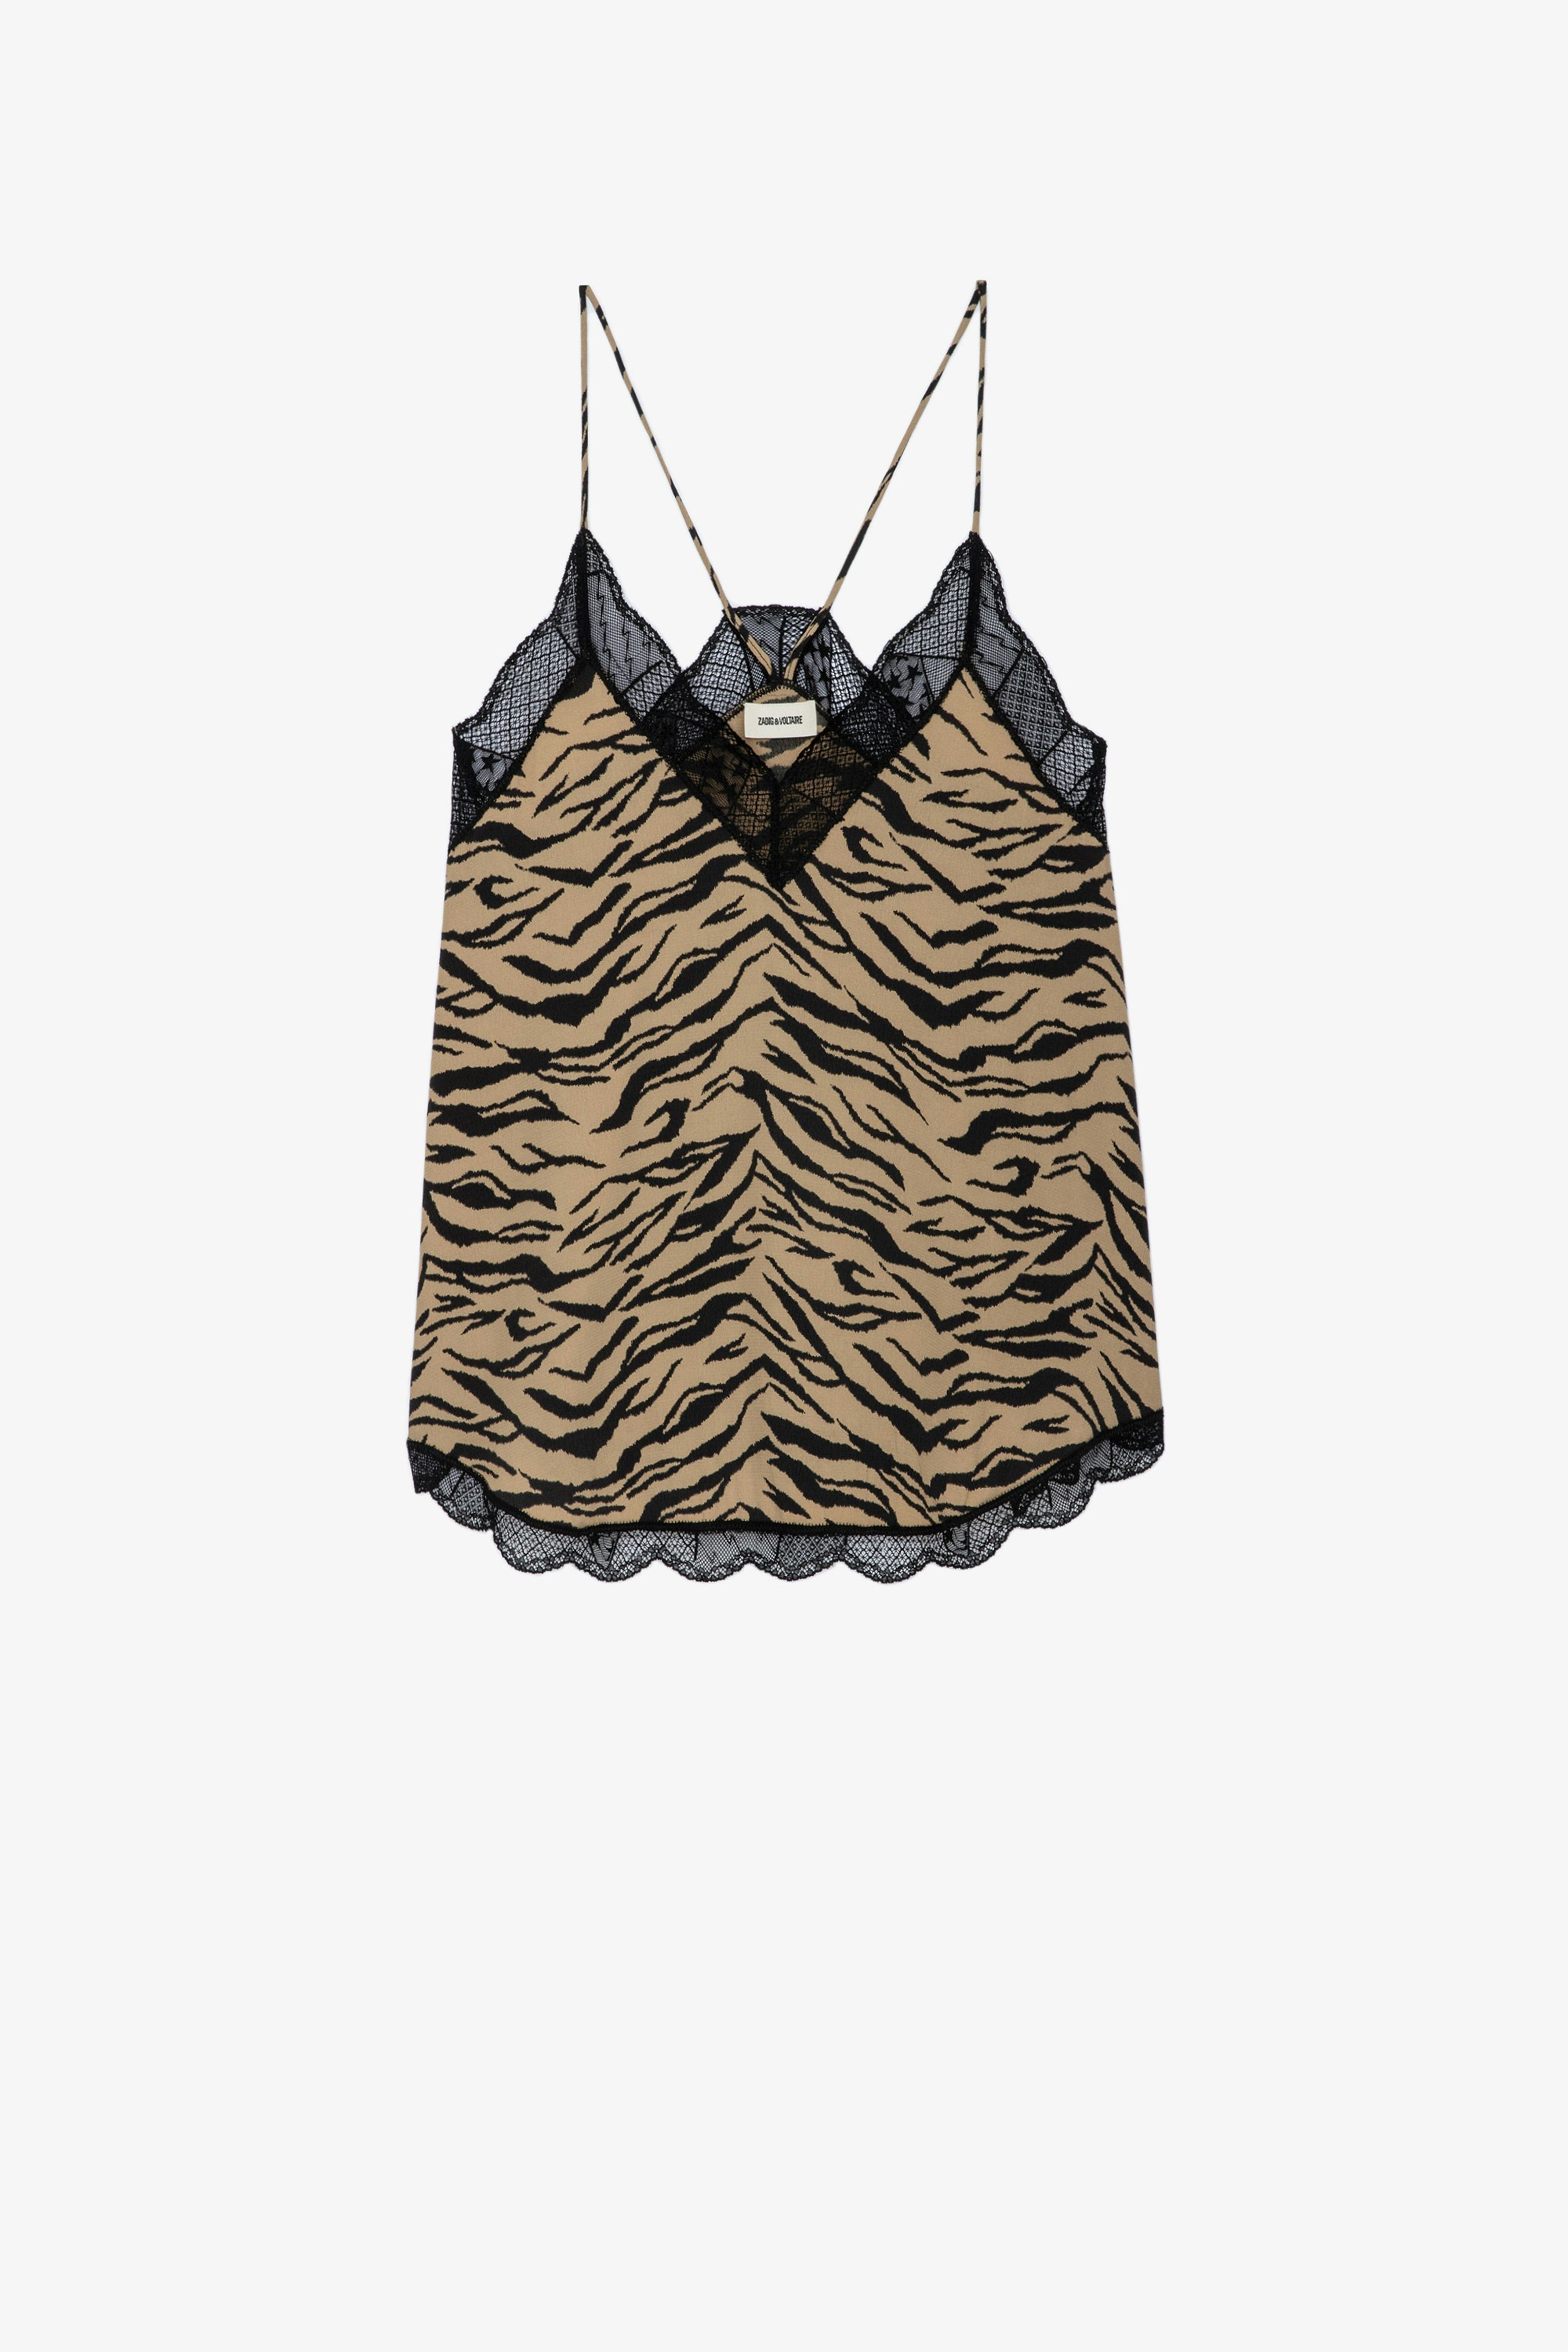 Christy Tiger Camisole women’s style